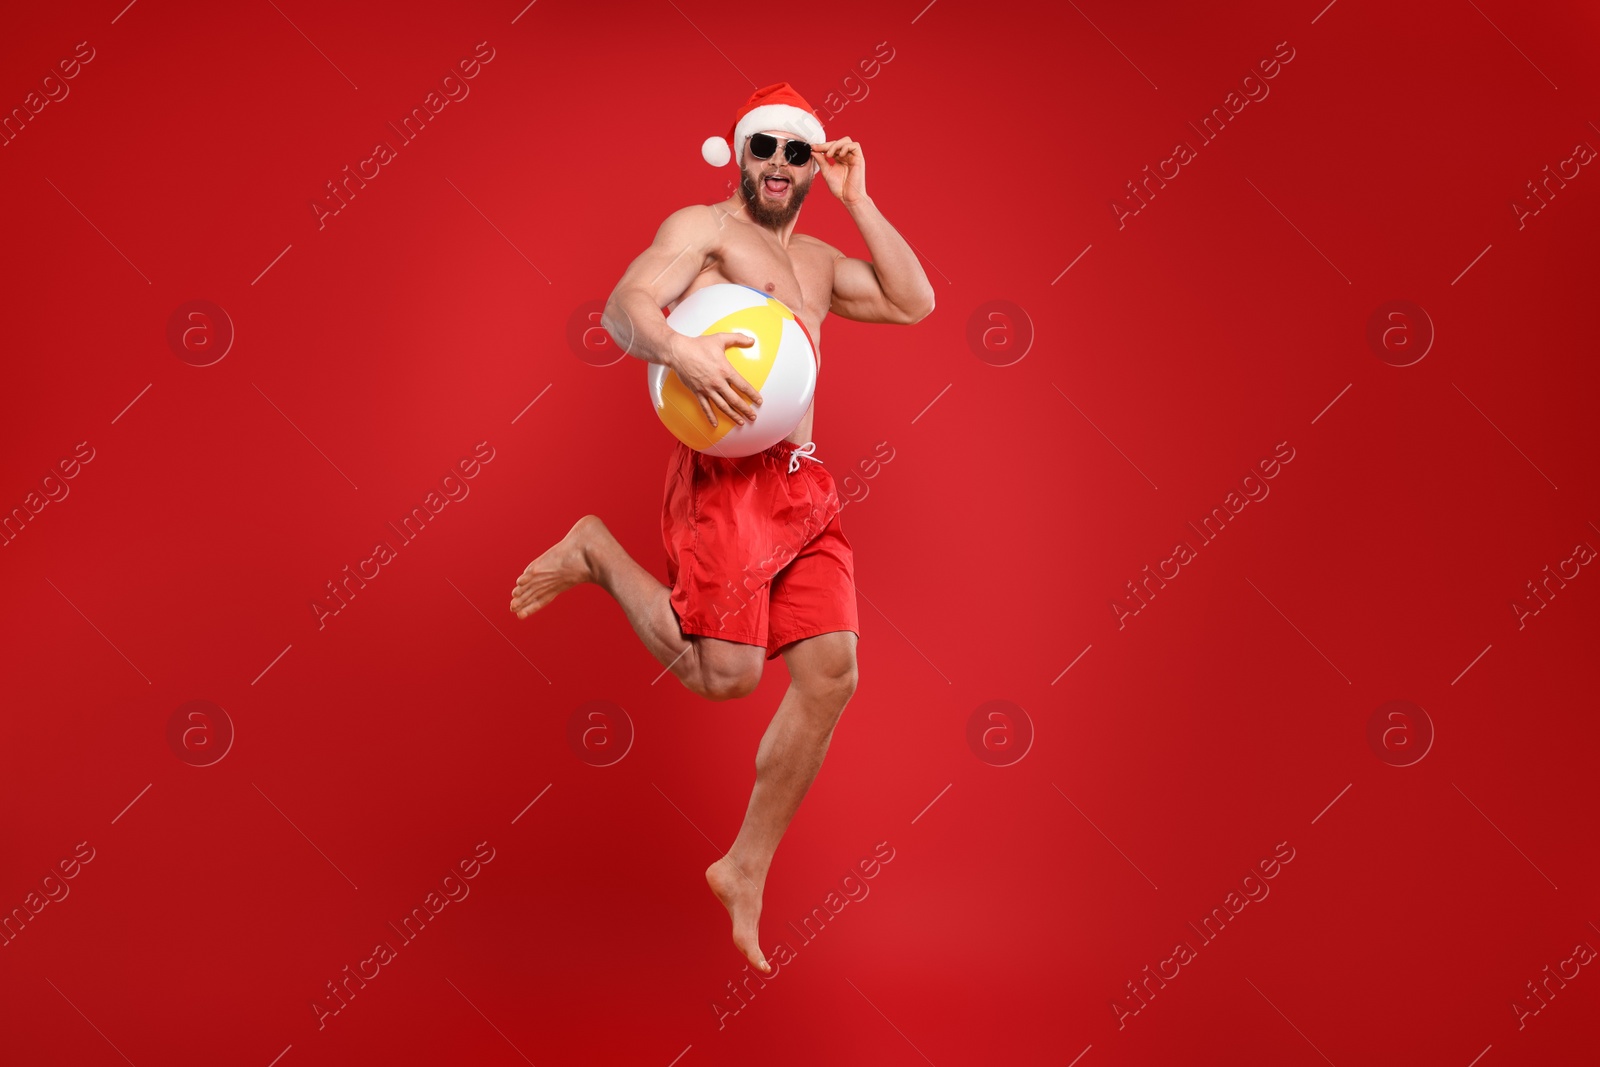 Photo of Muscular young man in Santa hat and sunglasses with ball jumping on red background